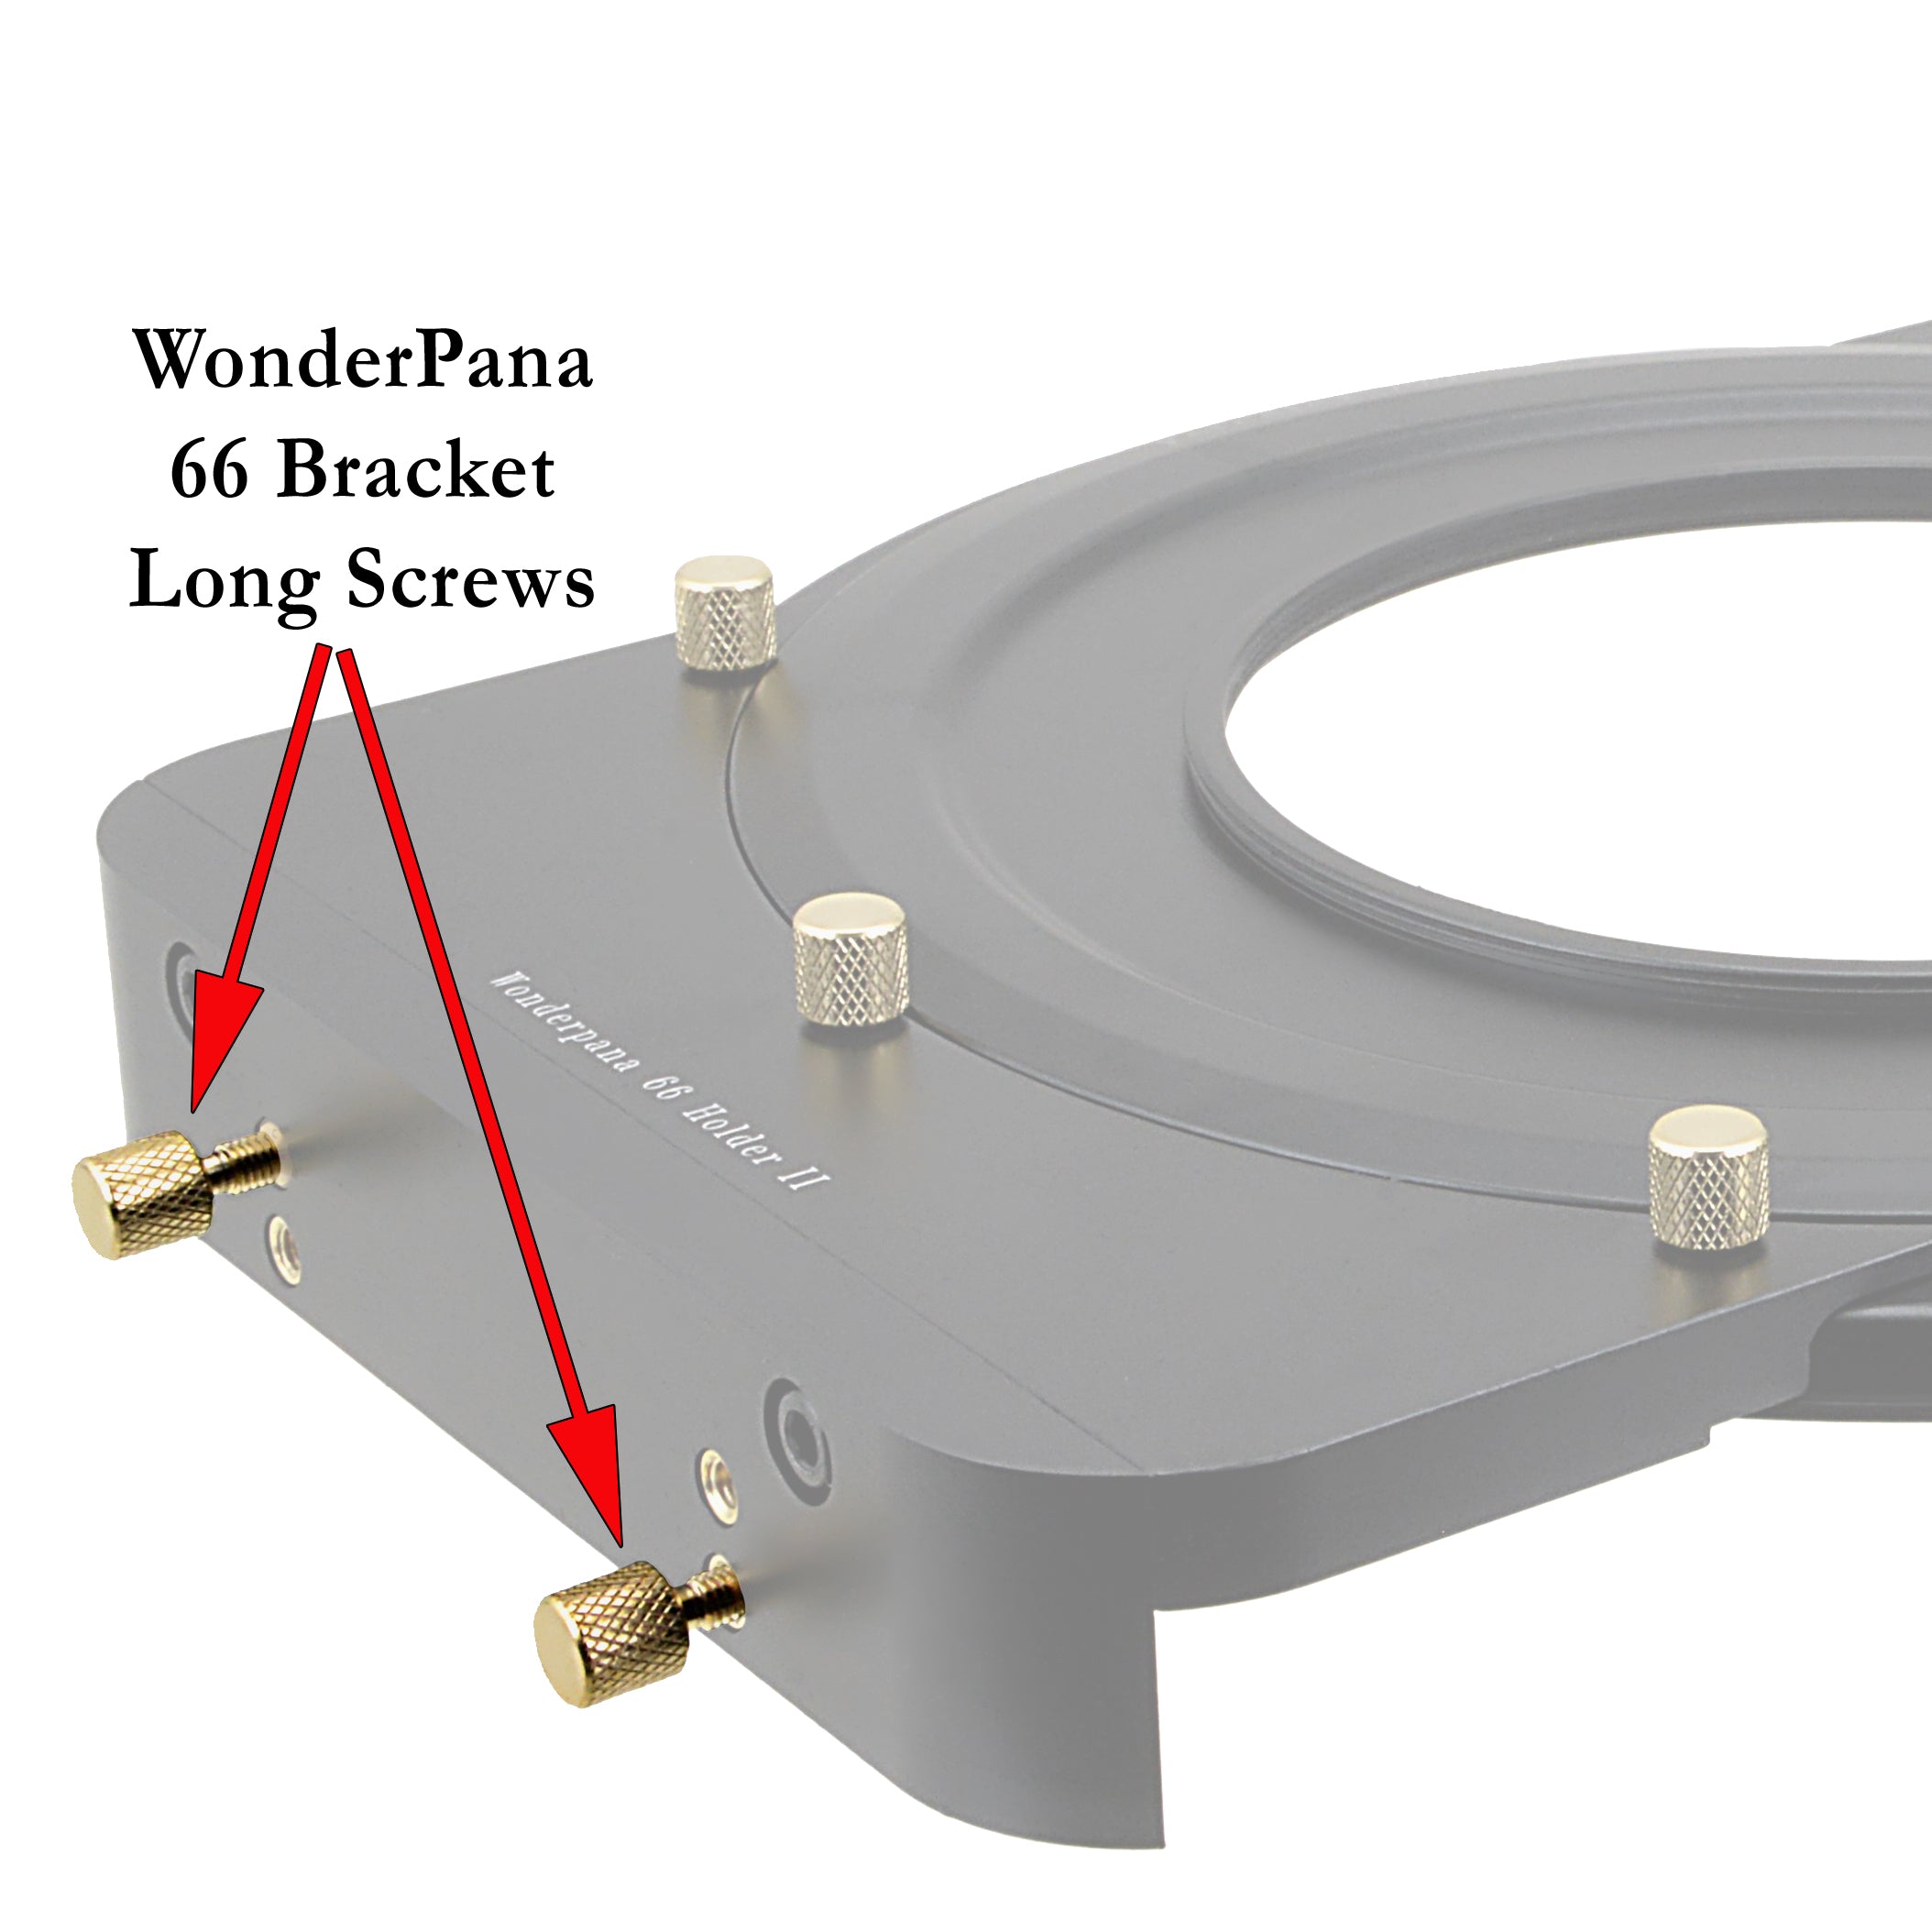 WonderPana FreeArc 66 OEM Long Screws (Set of 4), Used to Tighten the Grip on the 66 Filters While in the Holder - Replacement Part for WonderPana FreeArc Filter Holders (SKUs starting with 'WPFA-***')